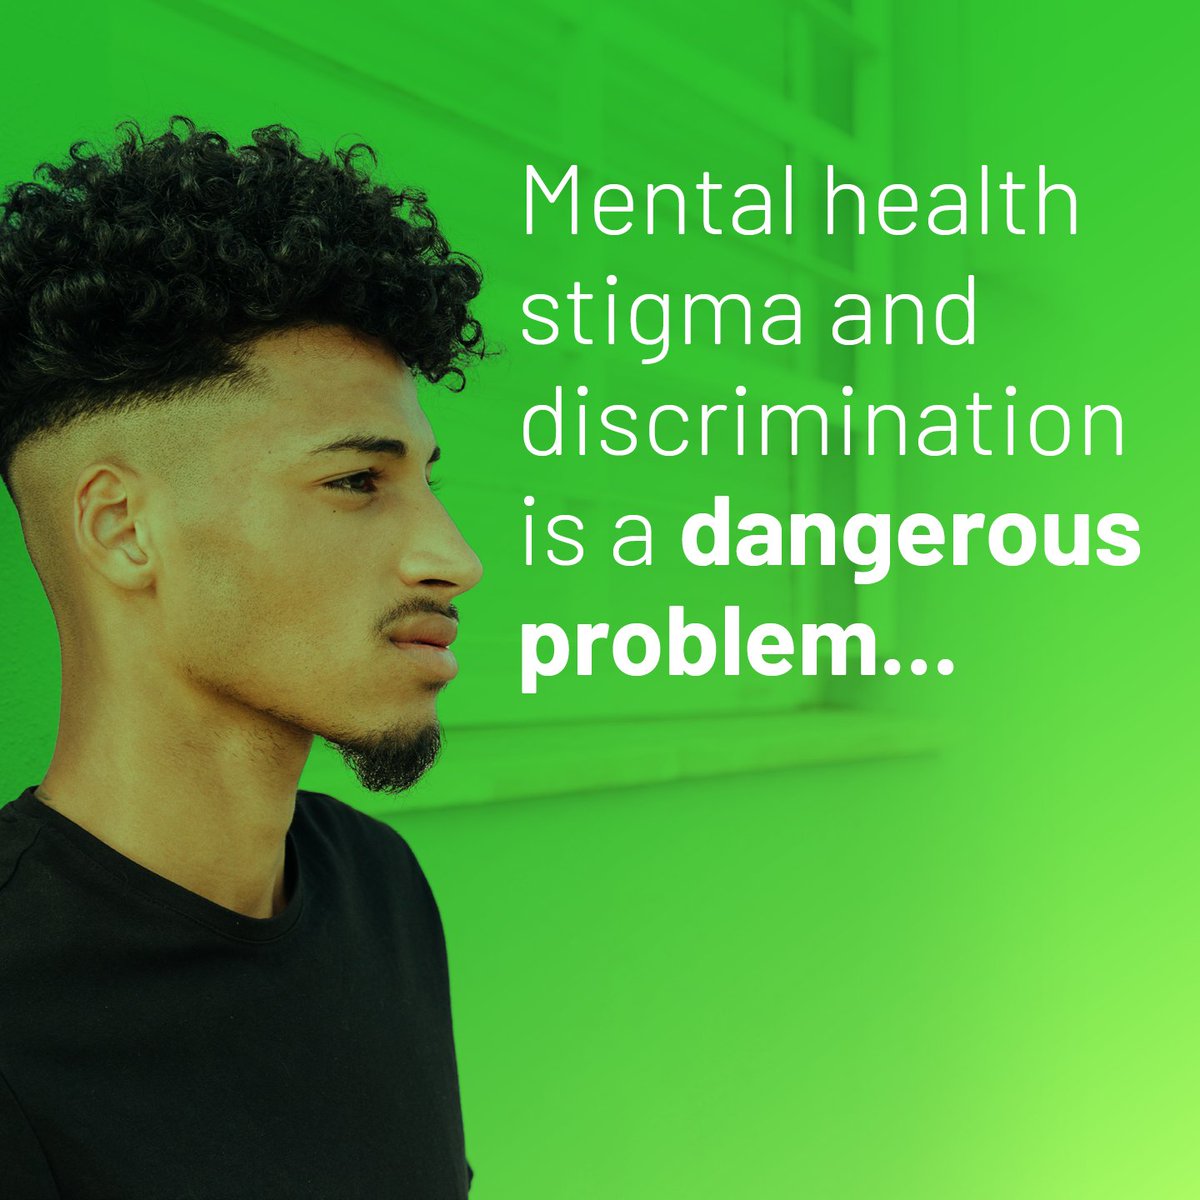 #DoYourShare to support mental health.

Let’s work together fix the problem of mental health stigma and discrimination.

The more we talk about mental health, the more we reduce the stigma and discrimination.

Follow this link for more information ⬇️ paho.org/en/campaigns/m…